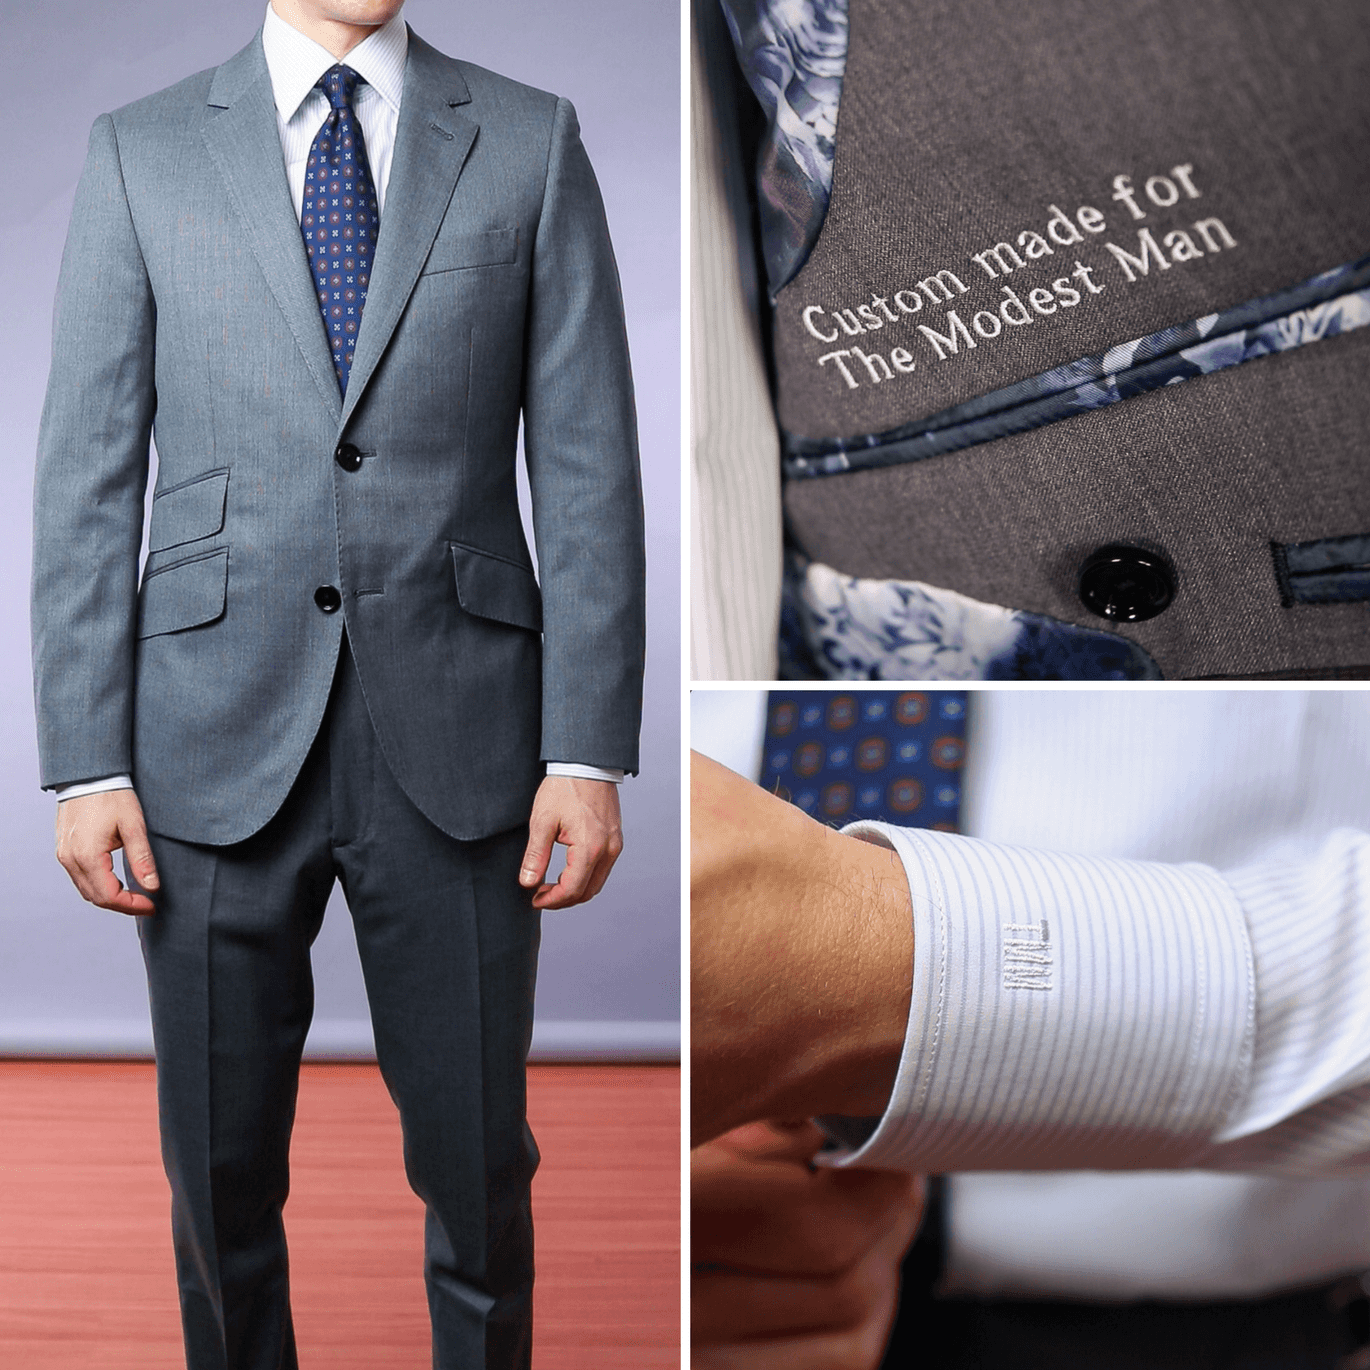 Why Custom Suits Are a Great Choice for Men